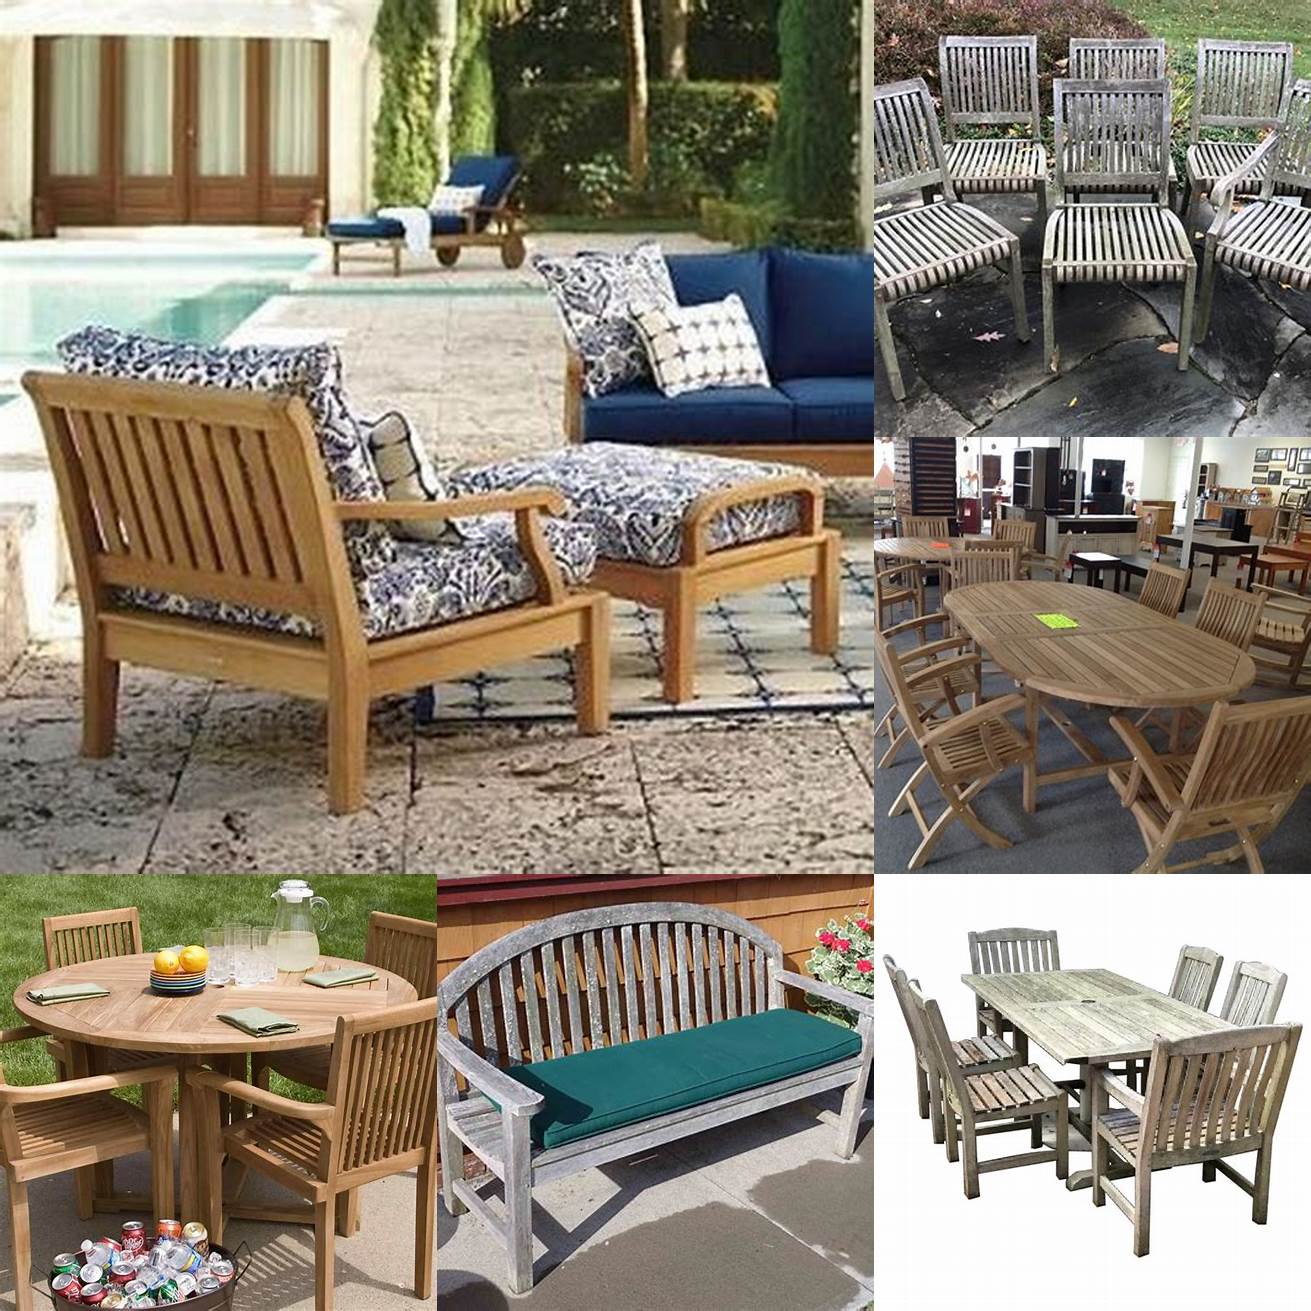 Smith and Hawken Teak Furniture in Different Settings